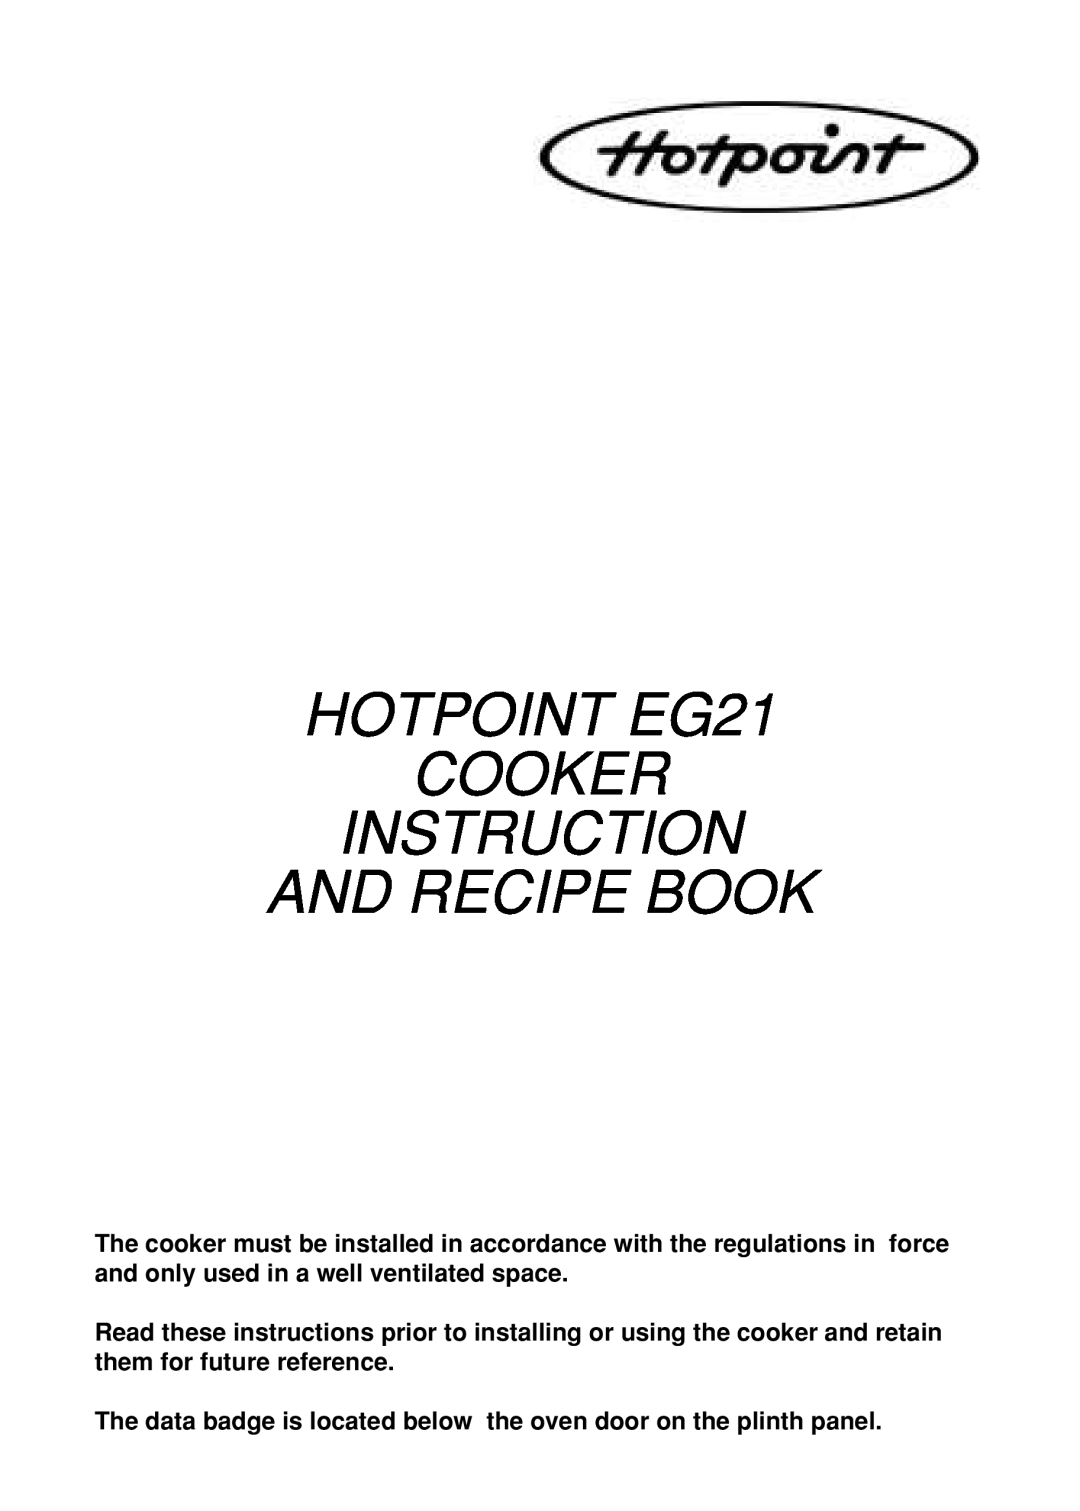 Hotpoint manual HOTPOINT EG21 COOKER INSTRUCTION AND RECIPE BOOK 